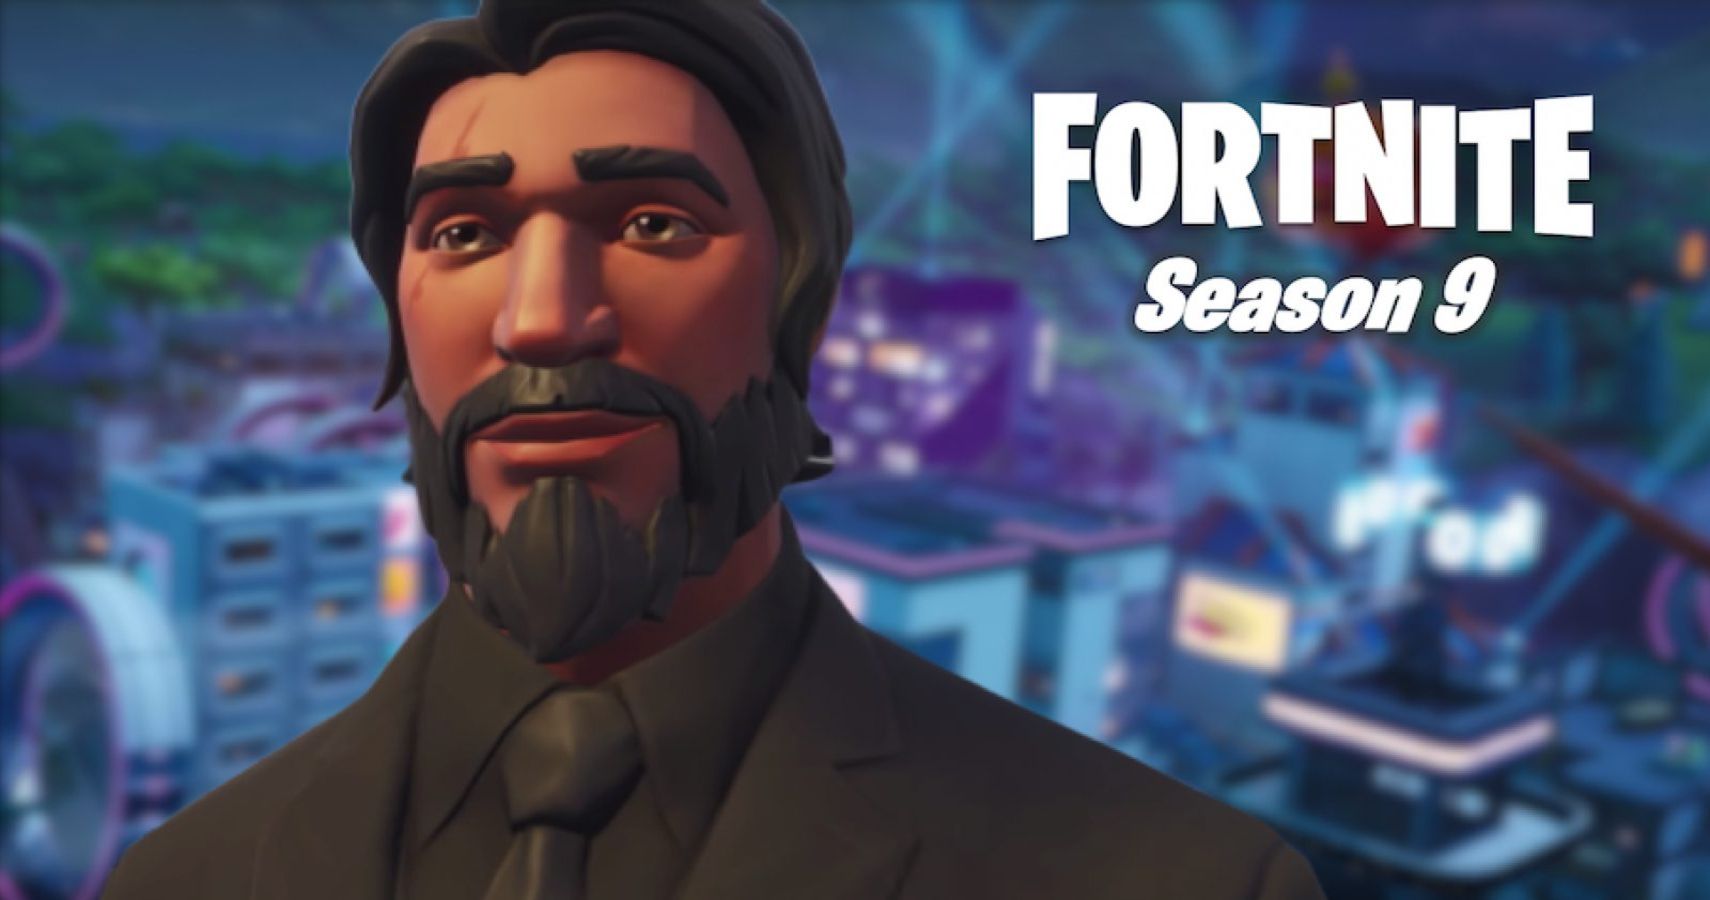 New Fortnite Buildings Could Tease Stranger Things and John Wick Crossovers